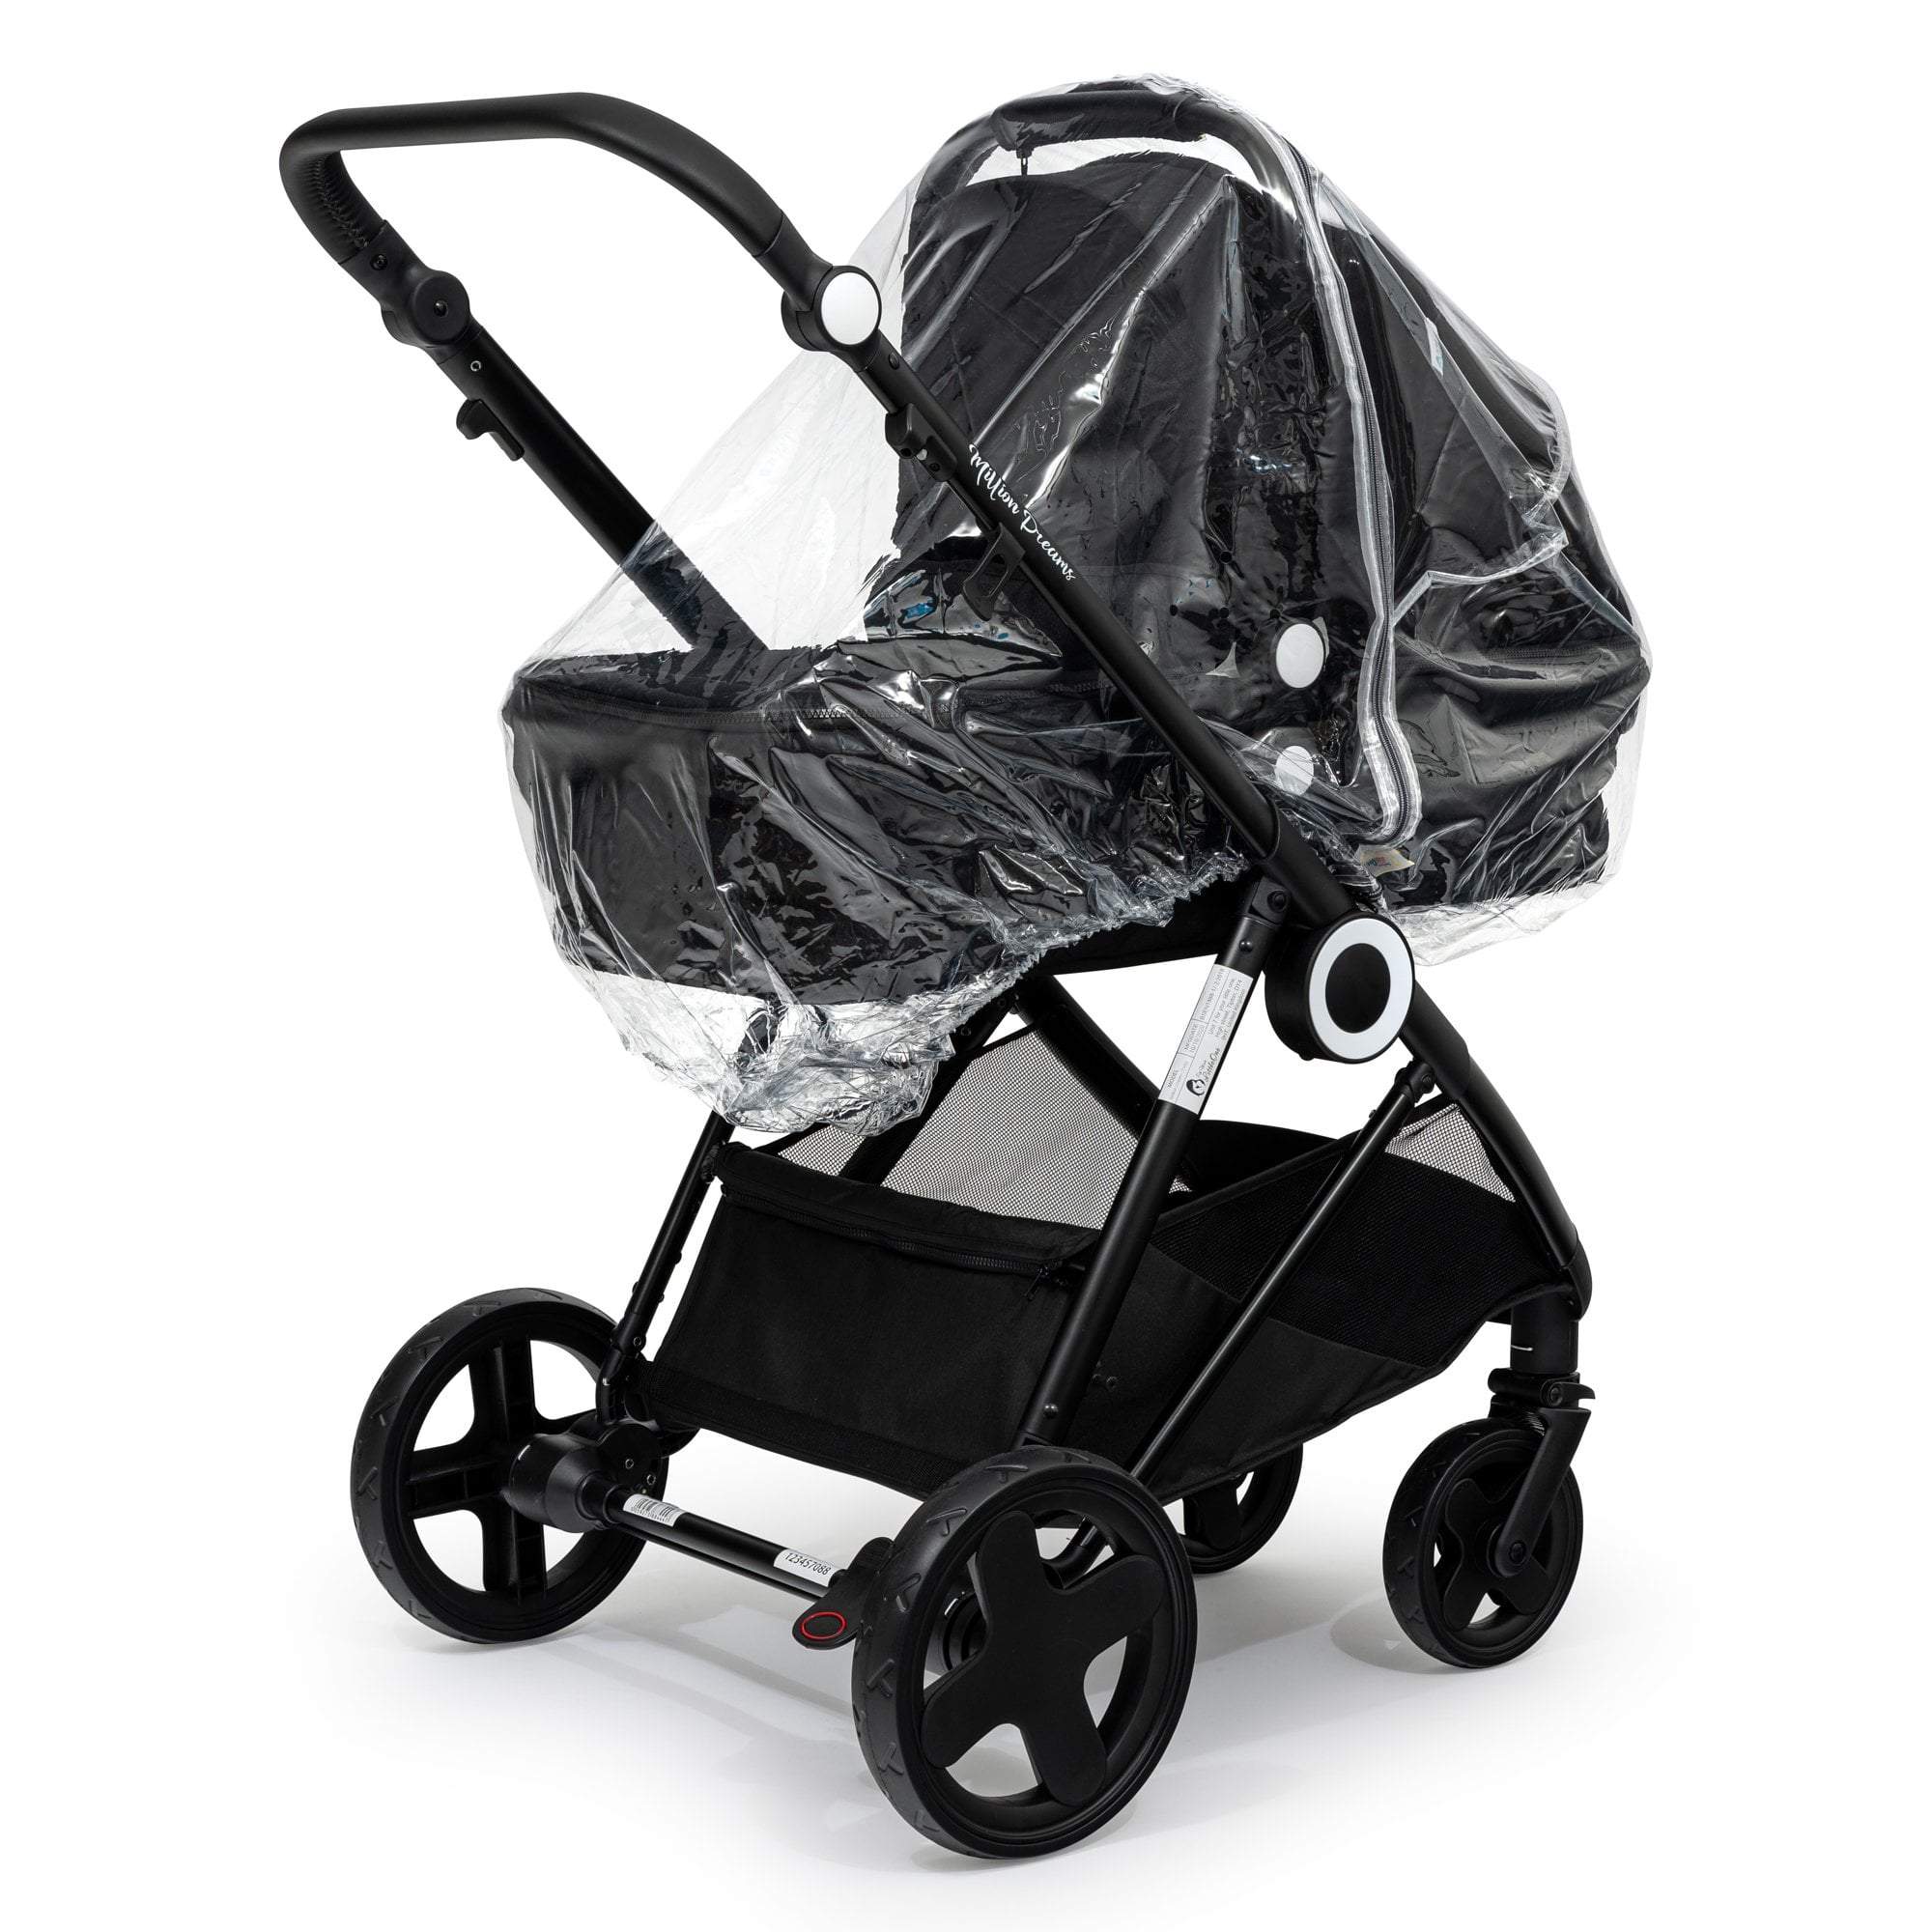 Carrycot Raincover Compatible With Seed - Fits All Models - For Your Little One